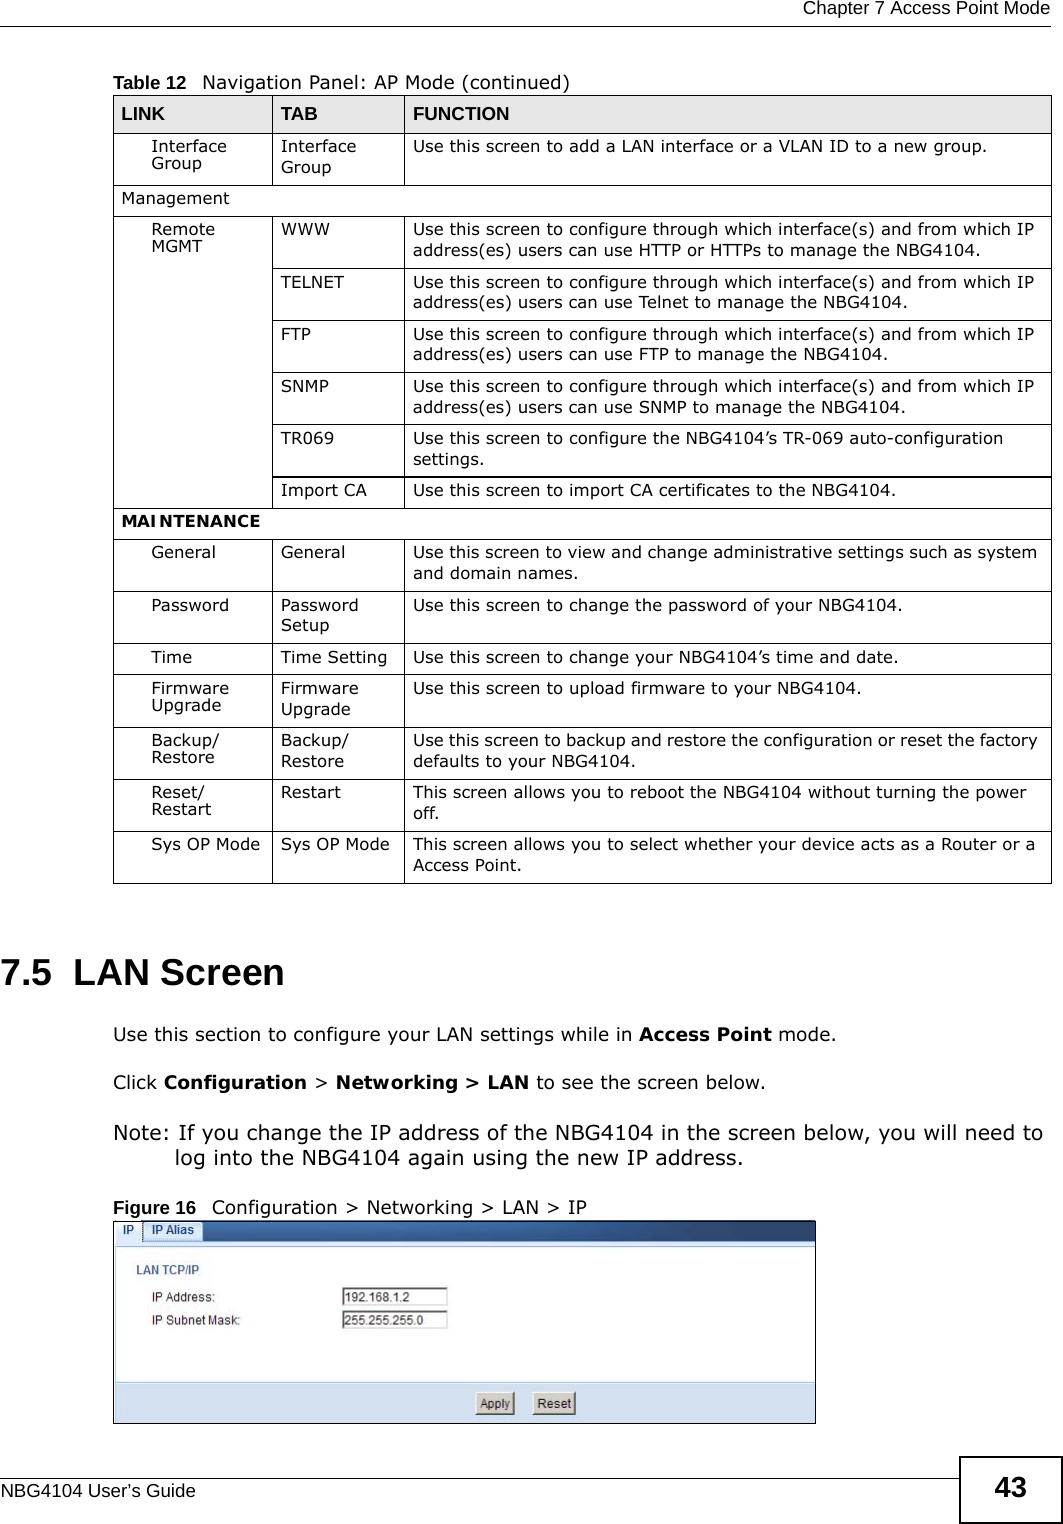  Chapter 7 Access Point ModeNBG4104 User’s Guide 437.5  LAN ScreenUse this section to configure your LAN settings while in Access Point mode. Click Configuration &gt; Networking &gt; LAN to see the screen below.Note: If you change the IP address of the NBG4104 in the screen below, you will need to log into the NBG4104 again using the new IP address.Figure 16   Configuration &gt; Networking &gt; LAN &gt; IP   Interface Group Interface GroupUse this screen to add a LAN interface or a VLAN ID to a new group.ManagementRemote MGMT WWW Use this screen to configure through which interface(s) and from which IP address(es) users can use HTTP or HTTPs to manage the NBG4104.TELNET Use this screen to configure through which interface(s) and from which IP address(es) users can use Telnet to manage the NBG4104.FTP Use this screen to configure through which interface(s) and from which IP address(es) users can use FTP to manage the NBG4104.SNMP Use this screen to configure through which interface(s) and from which IP address(es) users can use SNMP to manage the NBG4104.TR069 Use this screen to configure the NBG4104’s TR-069 auto-configuration settings.Import CA Use this screen to import CA certificates to the NBG4104.MAINTENANCEGeneral General Use this screen to view and change administrative settings such as system and domain names.Password Password SetupUse this screen to change the password of your NBG4104. Time Time Setting Use this screen to change your NBG4104’s time and date.Firmware Upgrade Firmware UpgradeUse this screen to upload firmware to your NBG4104.Backup/Restore Backup/RestoreUse this screen to backup and restore the configuration or reset the factory defaults to your NBG4104. Reset/Restart Restart This screen allows you to reboot the NBG4104 without turning the power off.Sys OP Mode Sys OP Mode This screen allows you to select whether your device acts as a Router or a Access Point.Table 12   Navigation Panel: AP Mode (continued)LINK TAB FUNCTION